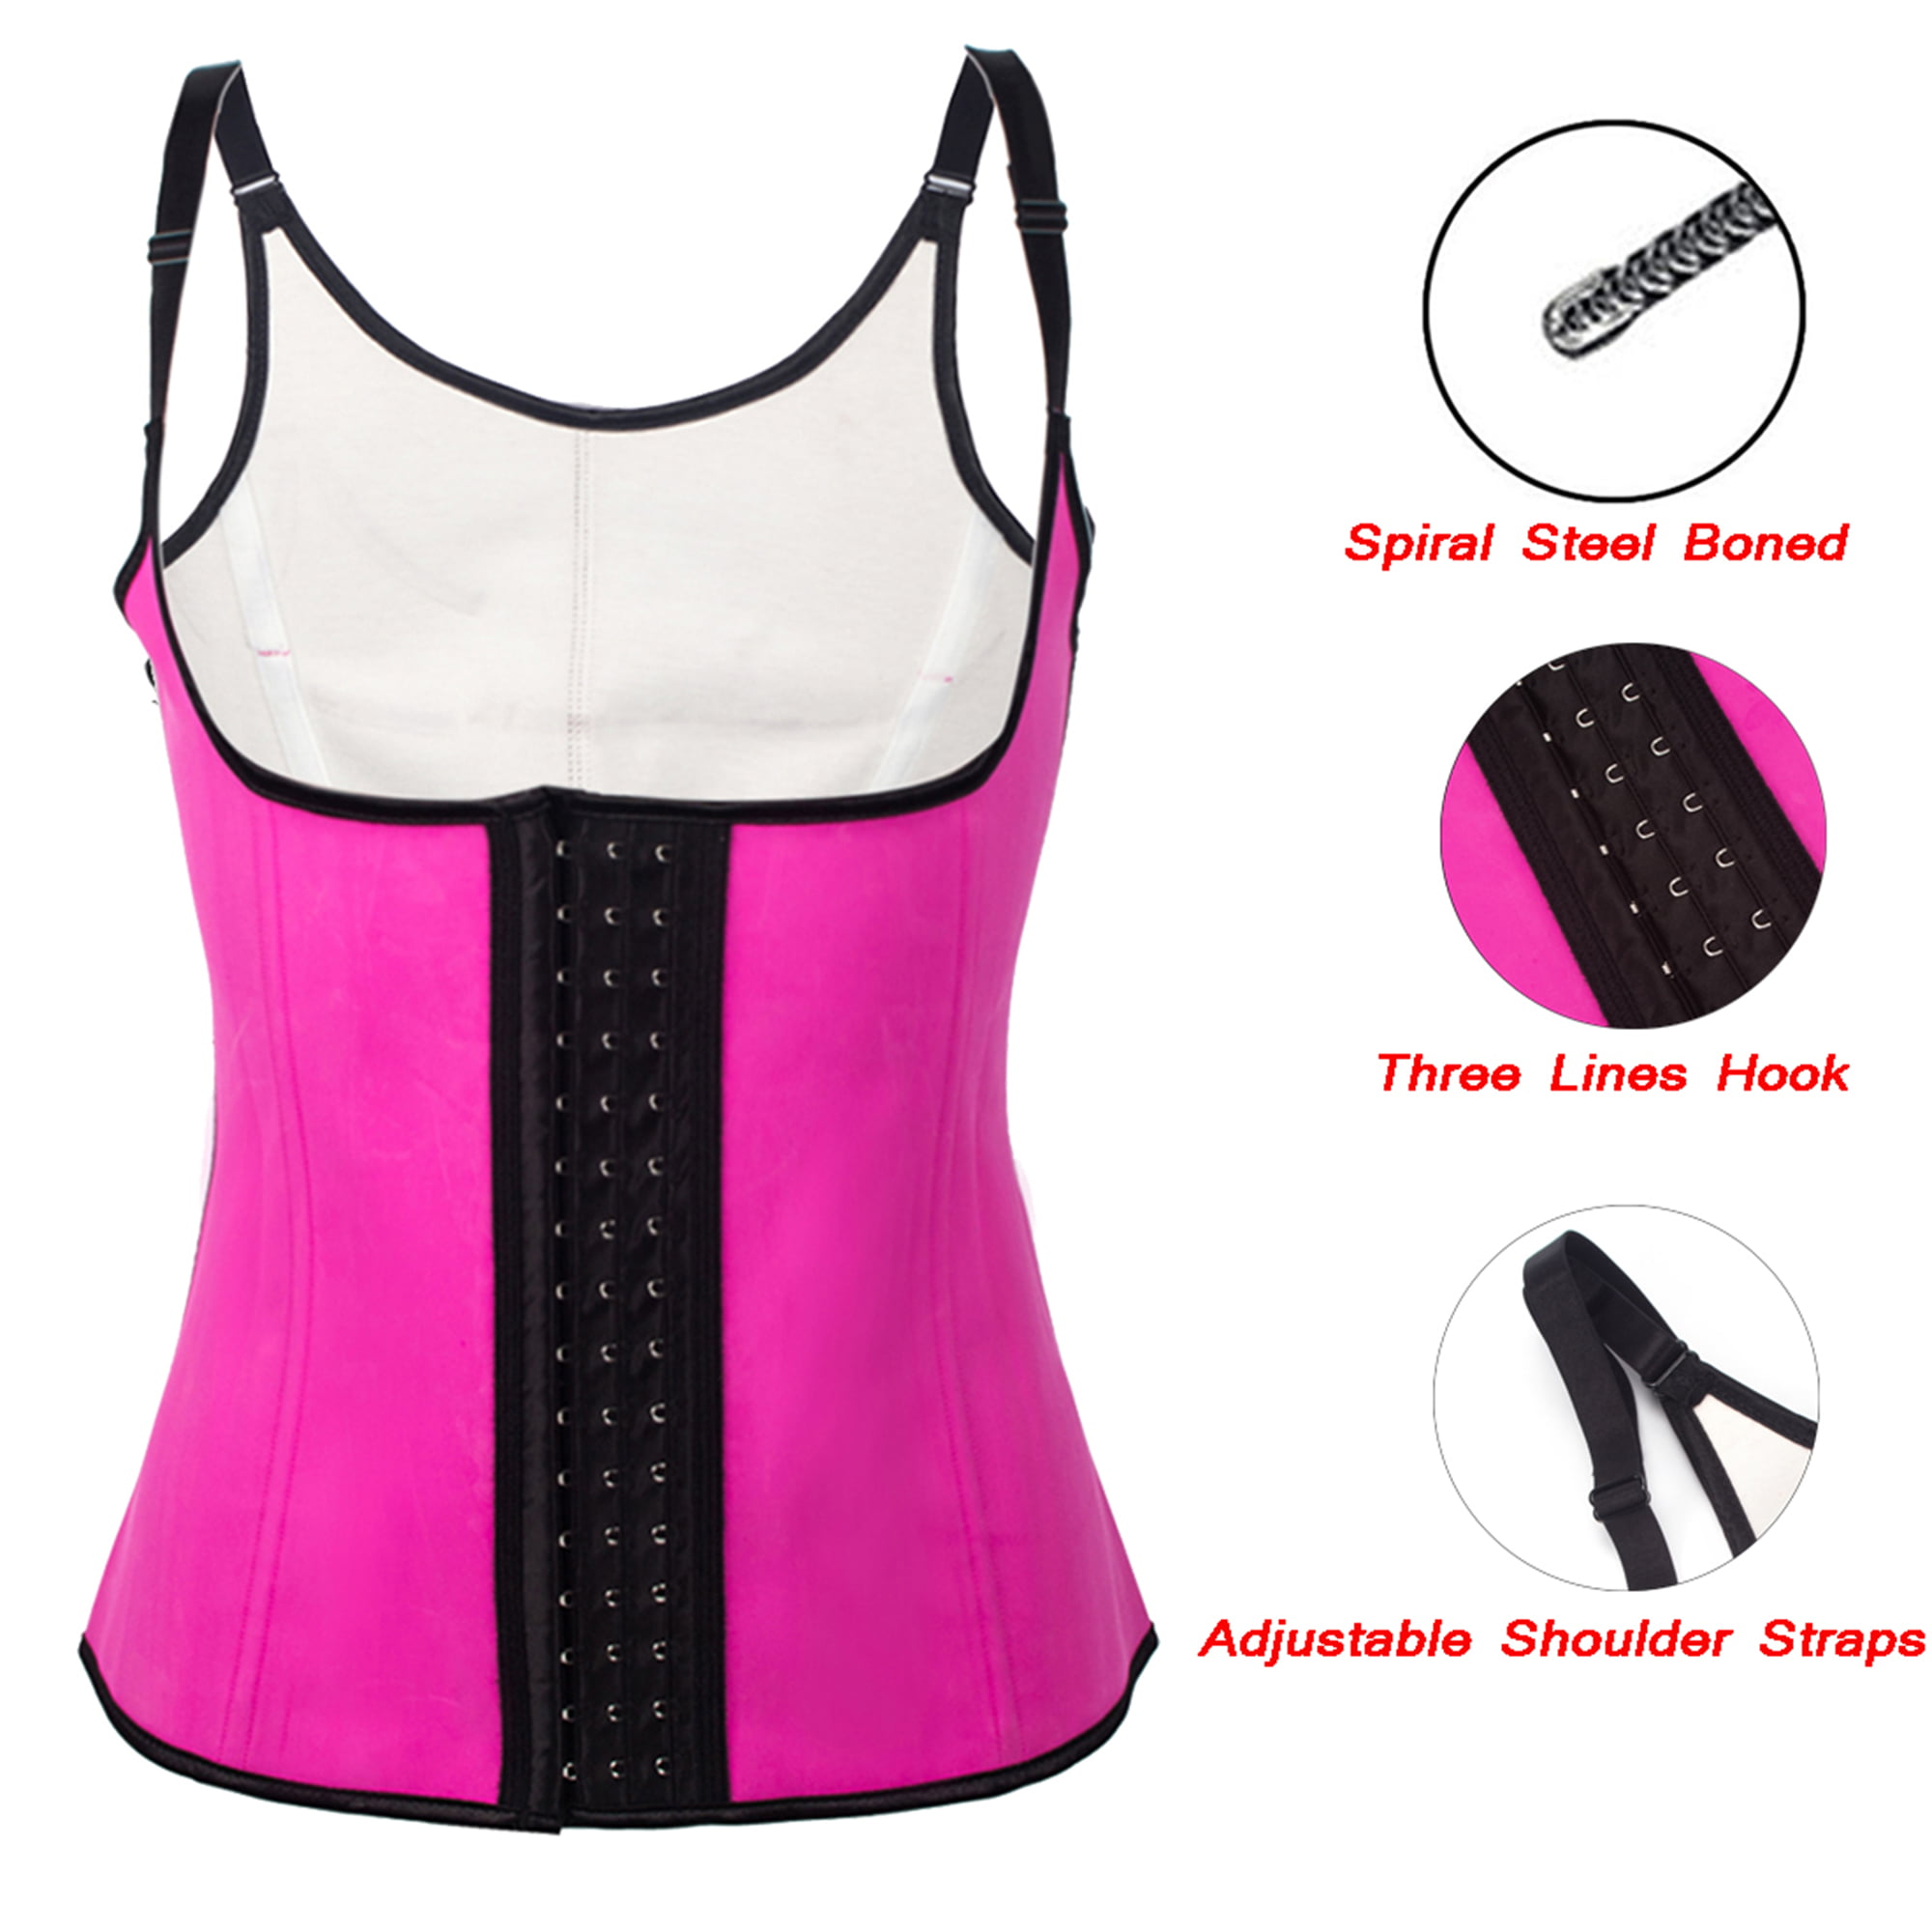 Details about   High Quality Women Body Shaper Waist Trainer Weight Loss Slimming Sweat Vest US 